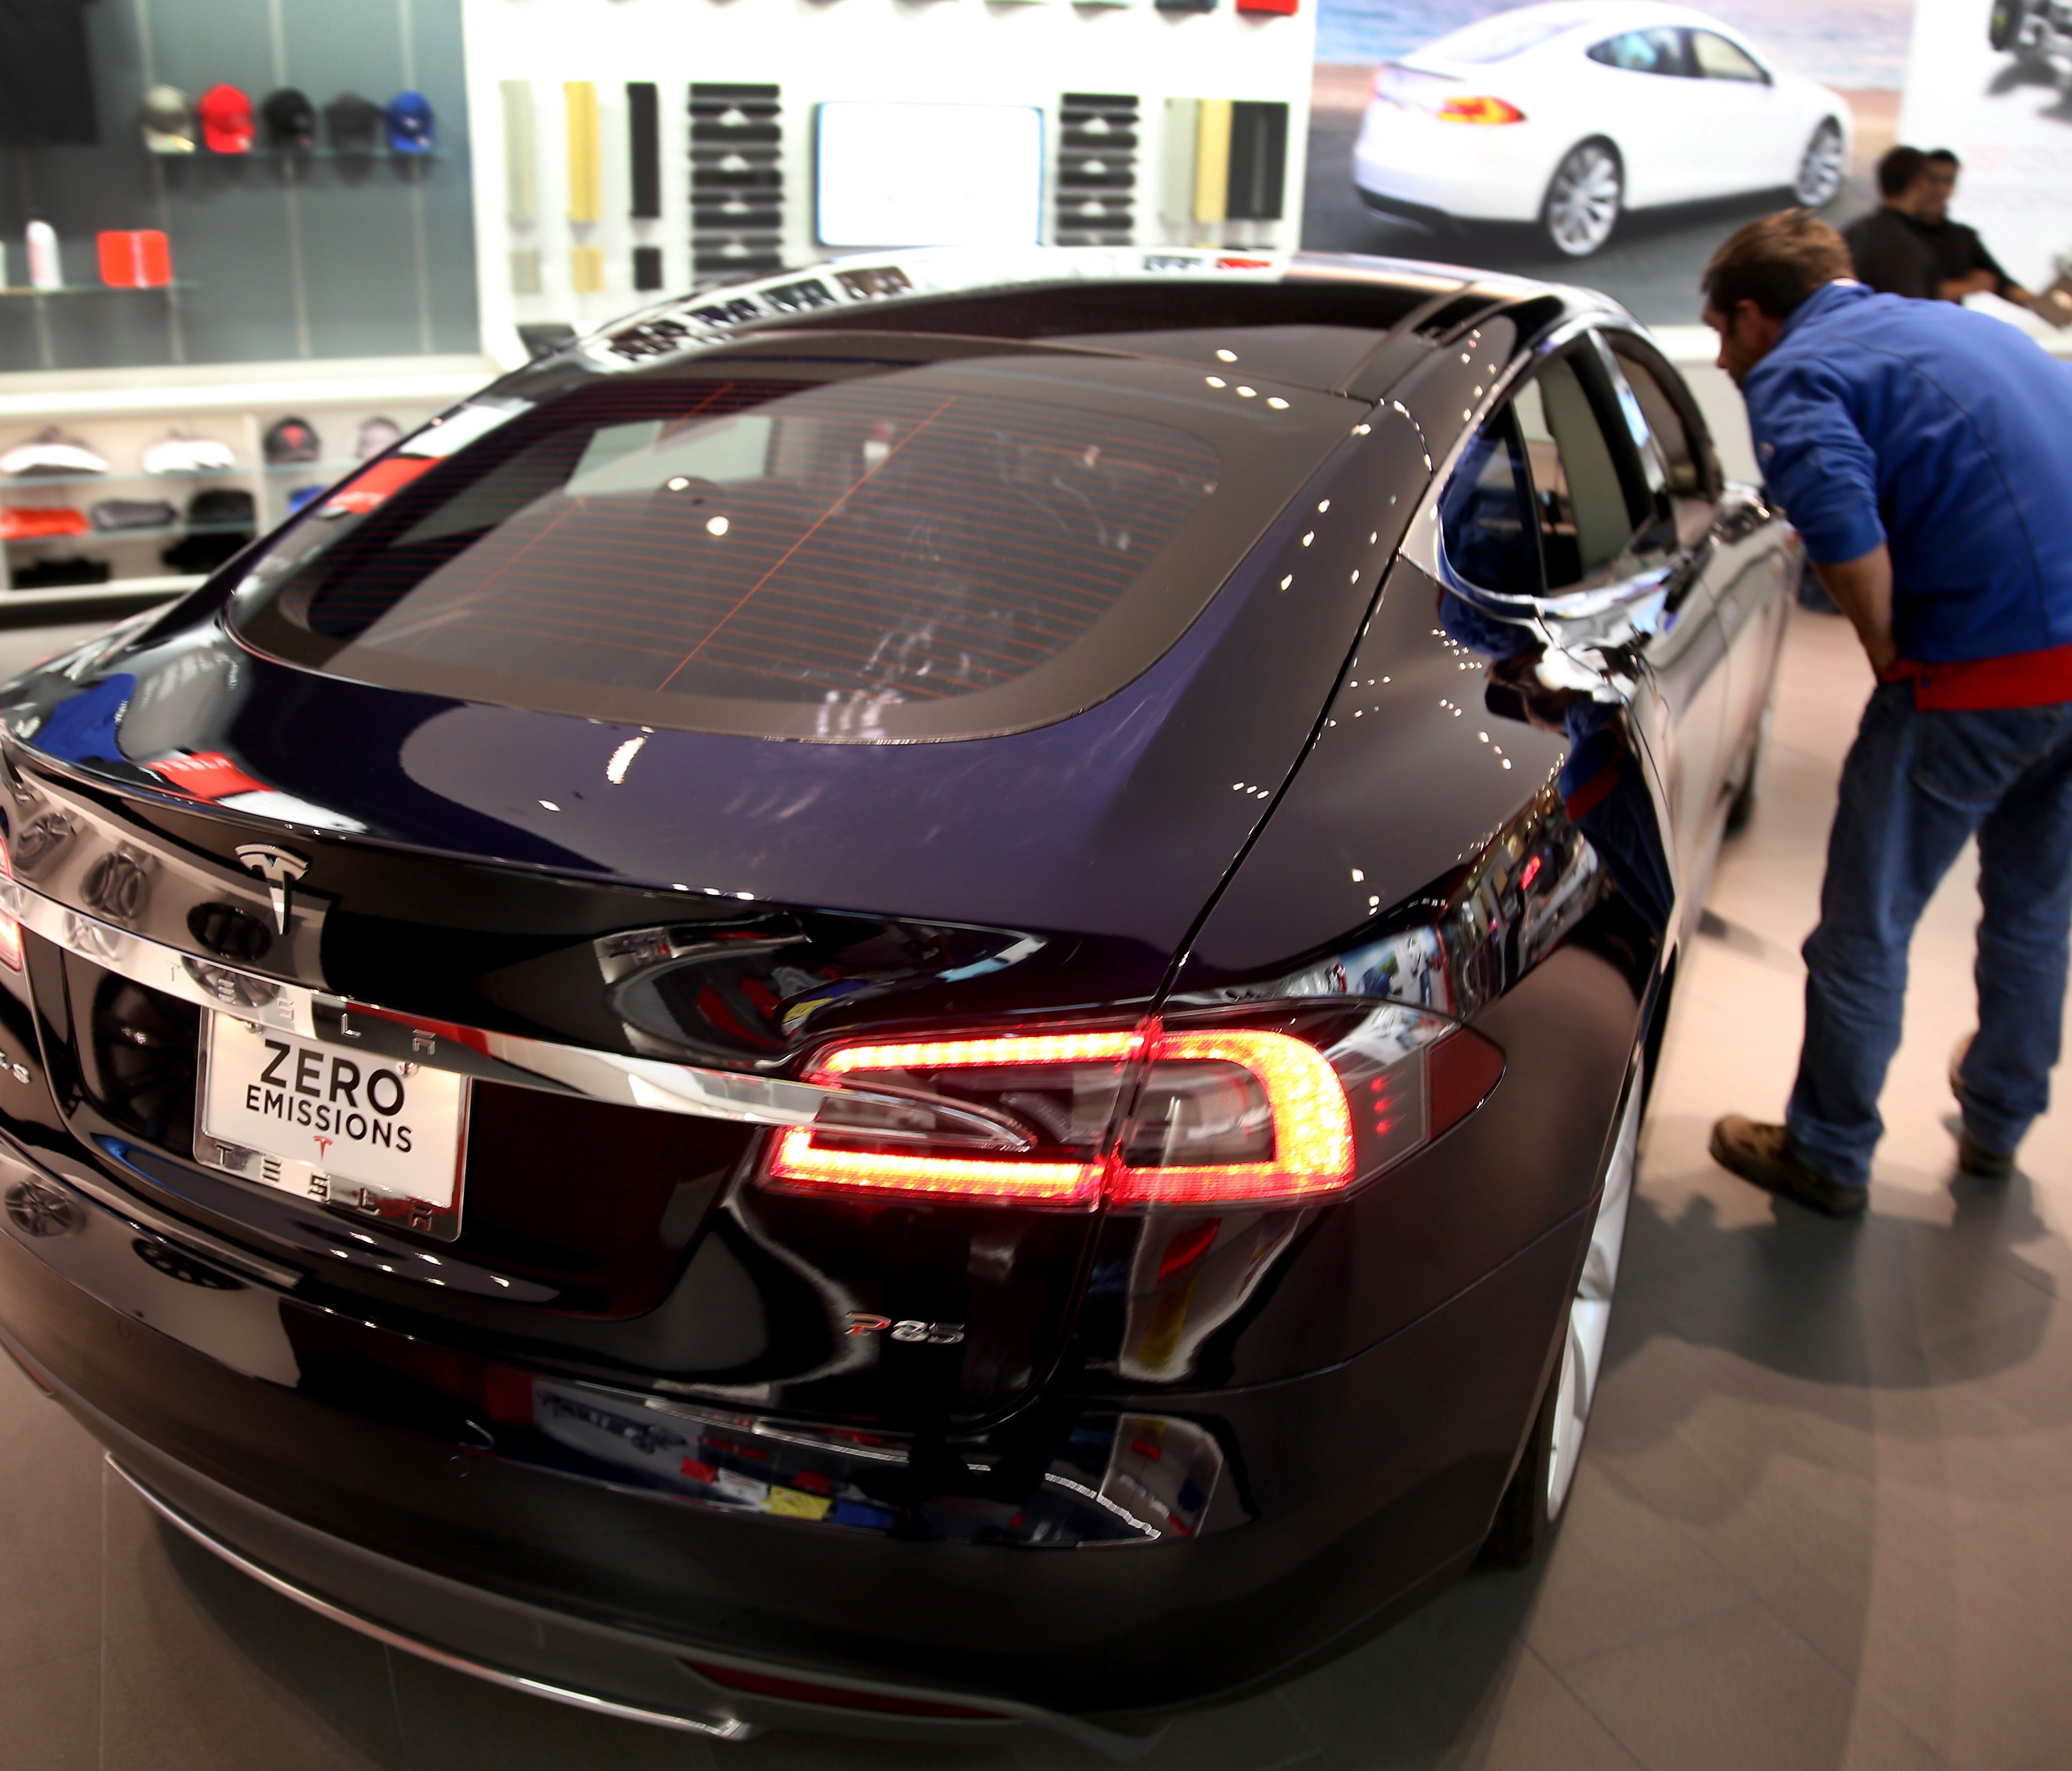 A visitor to theTesla Motors showroom looks at a vehicle at the Dadeland Mall in Miami in this 2014 file photo